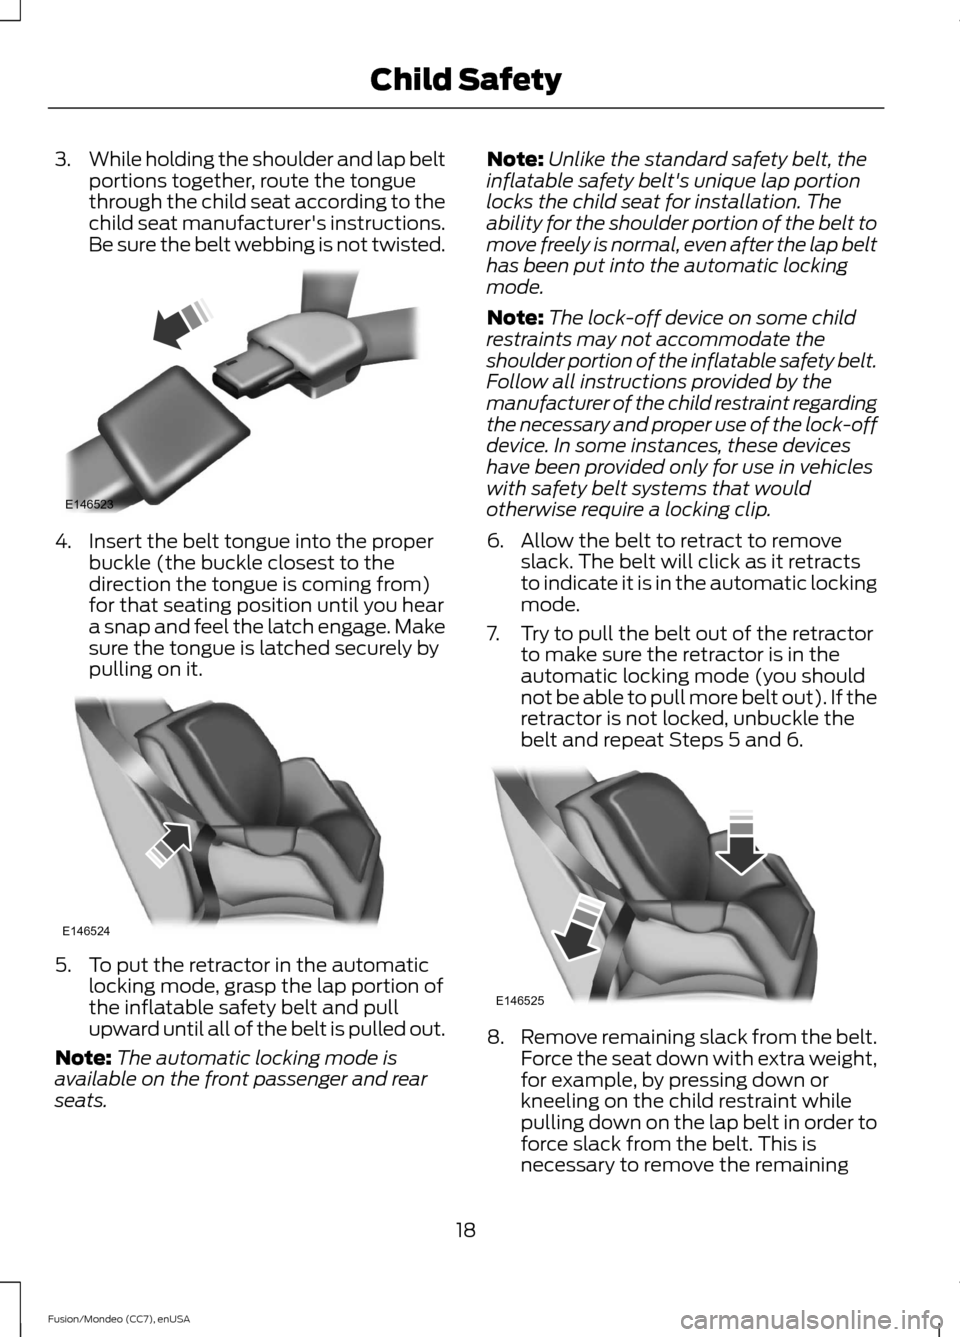 FORD FUSION (AMERICAS) 2015 2.G Owners Manual 3.
While holding the shoulder and lap belt
portions together, route the tongue
through the child seat according to the
child seat manufacturers instructions.
Be sure the belt webbing is not twisted. 